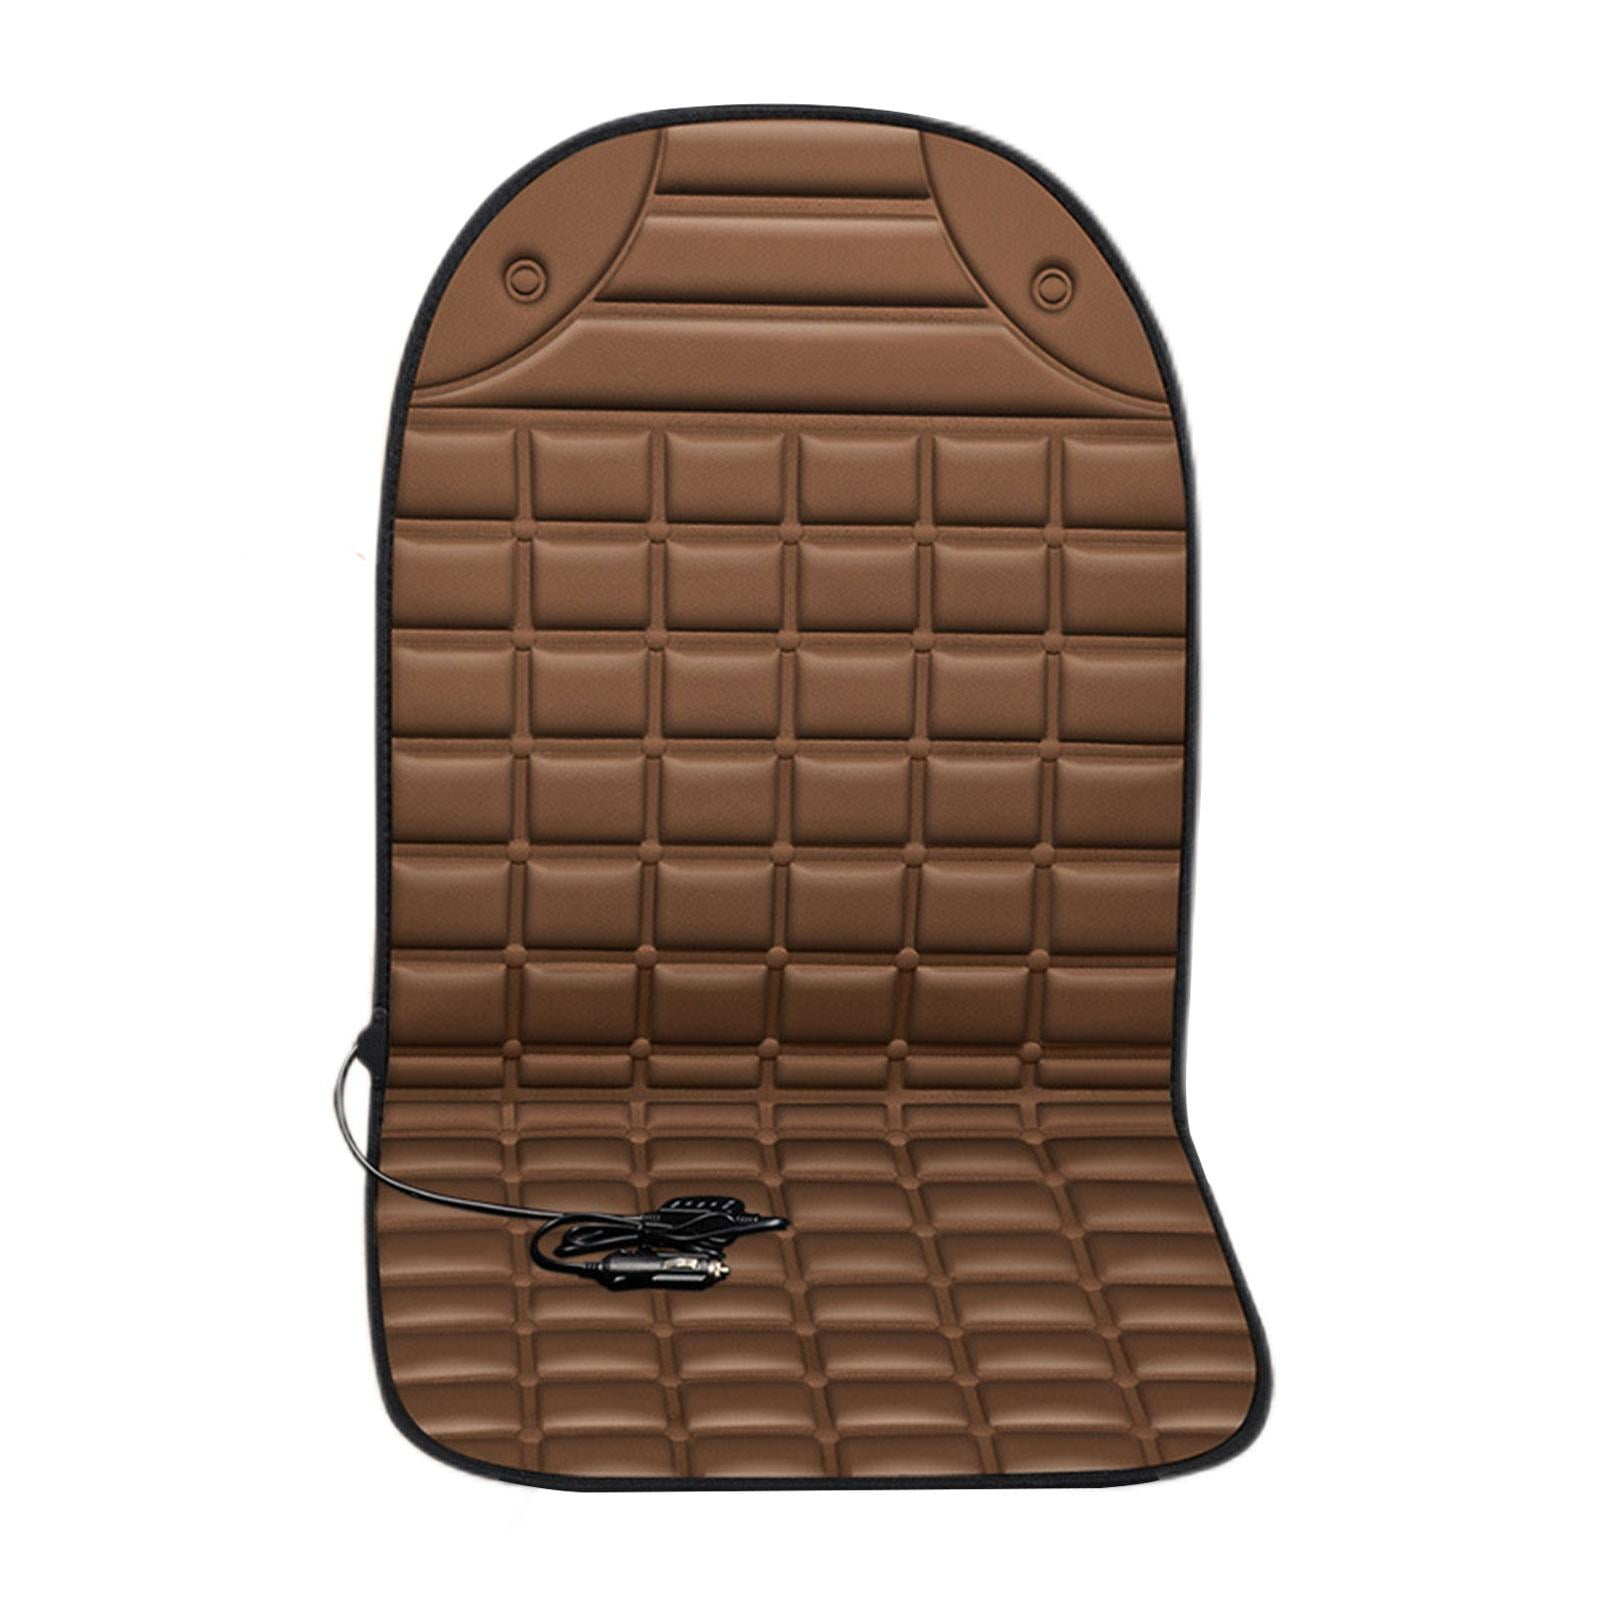 TISHIJIE Car Heated Seat Cushion with Intelligence Temperature